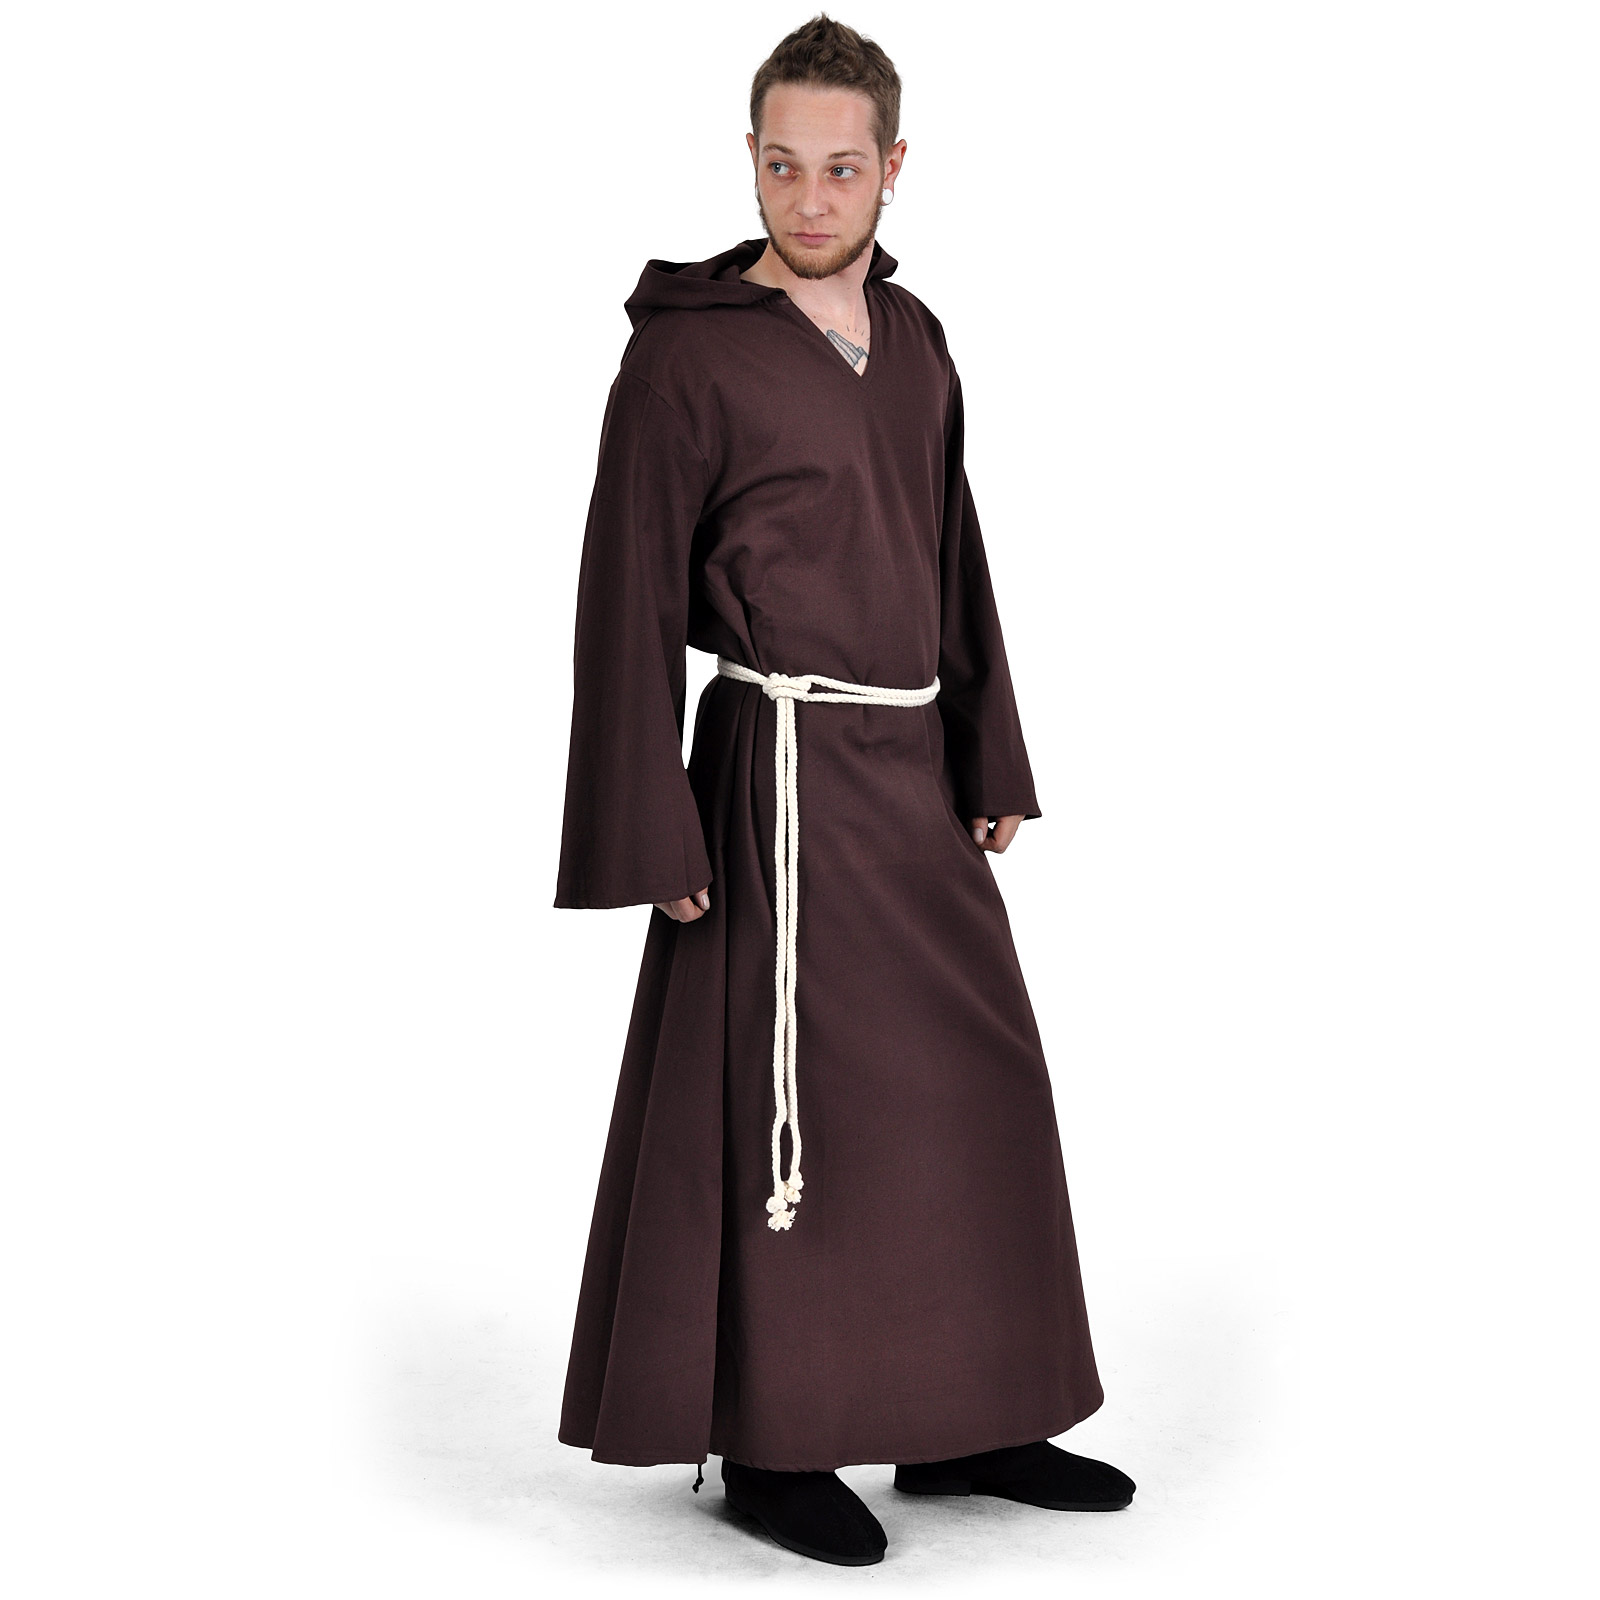 Monk's robe with cord brown